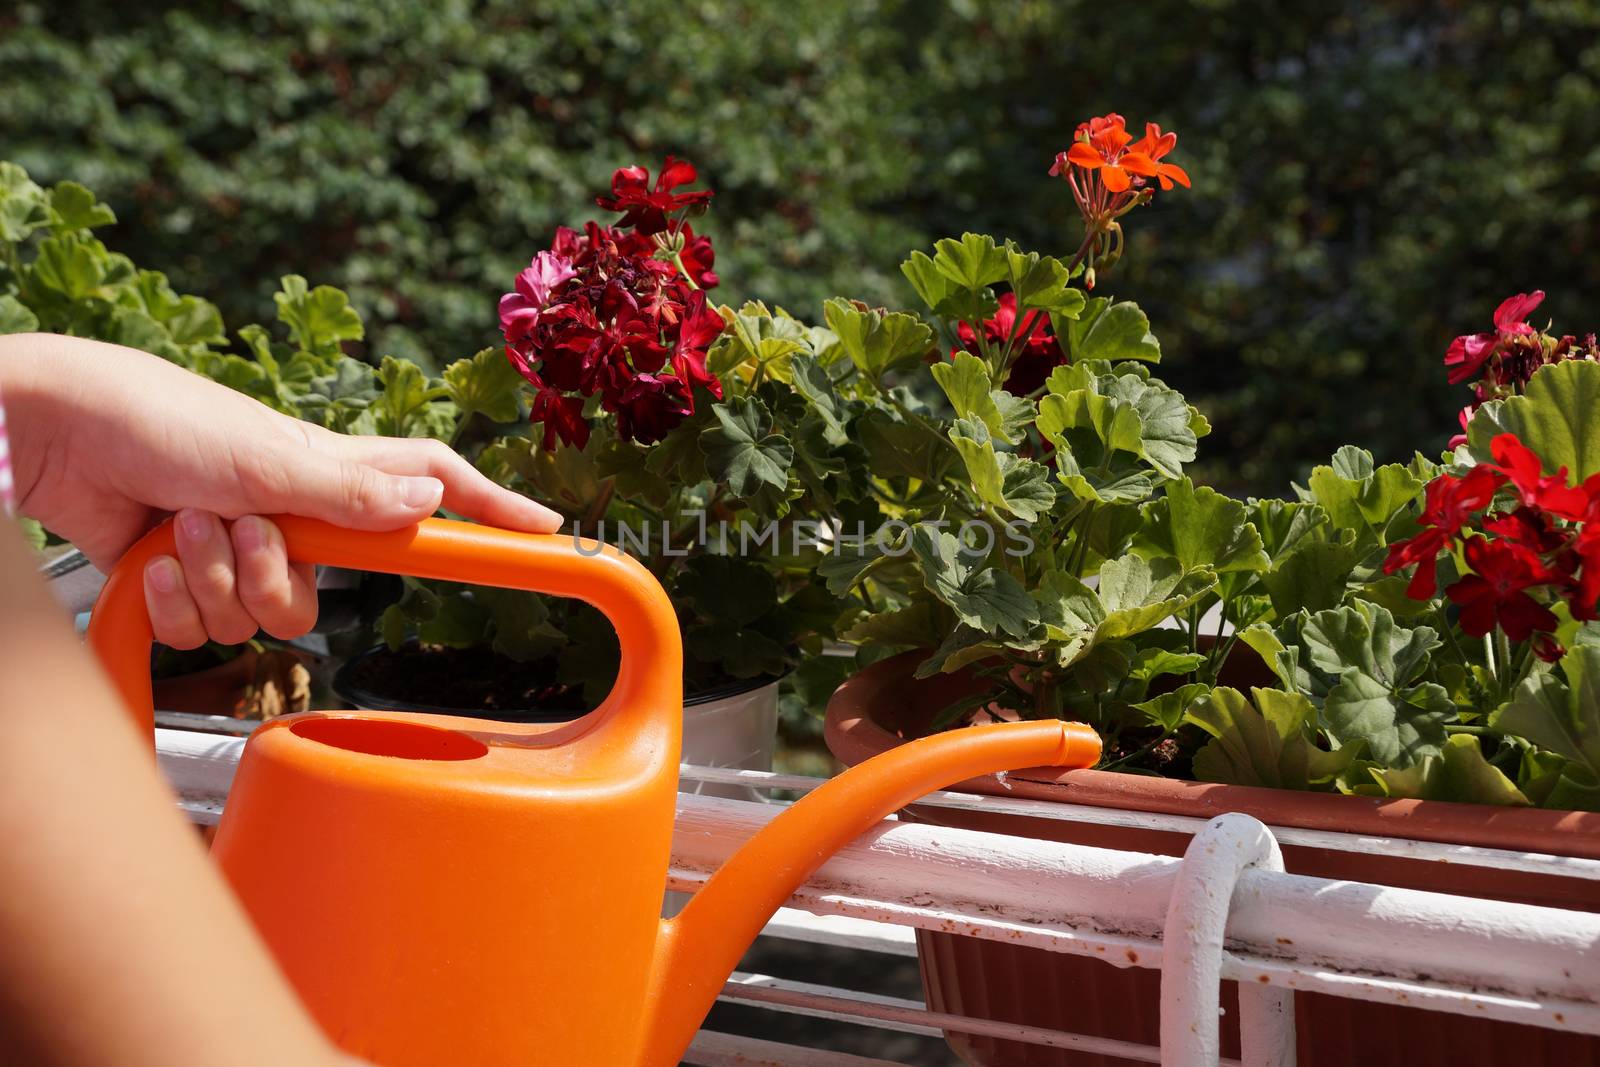 female hand with watering can watering flowers on the balcony.